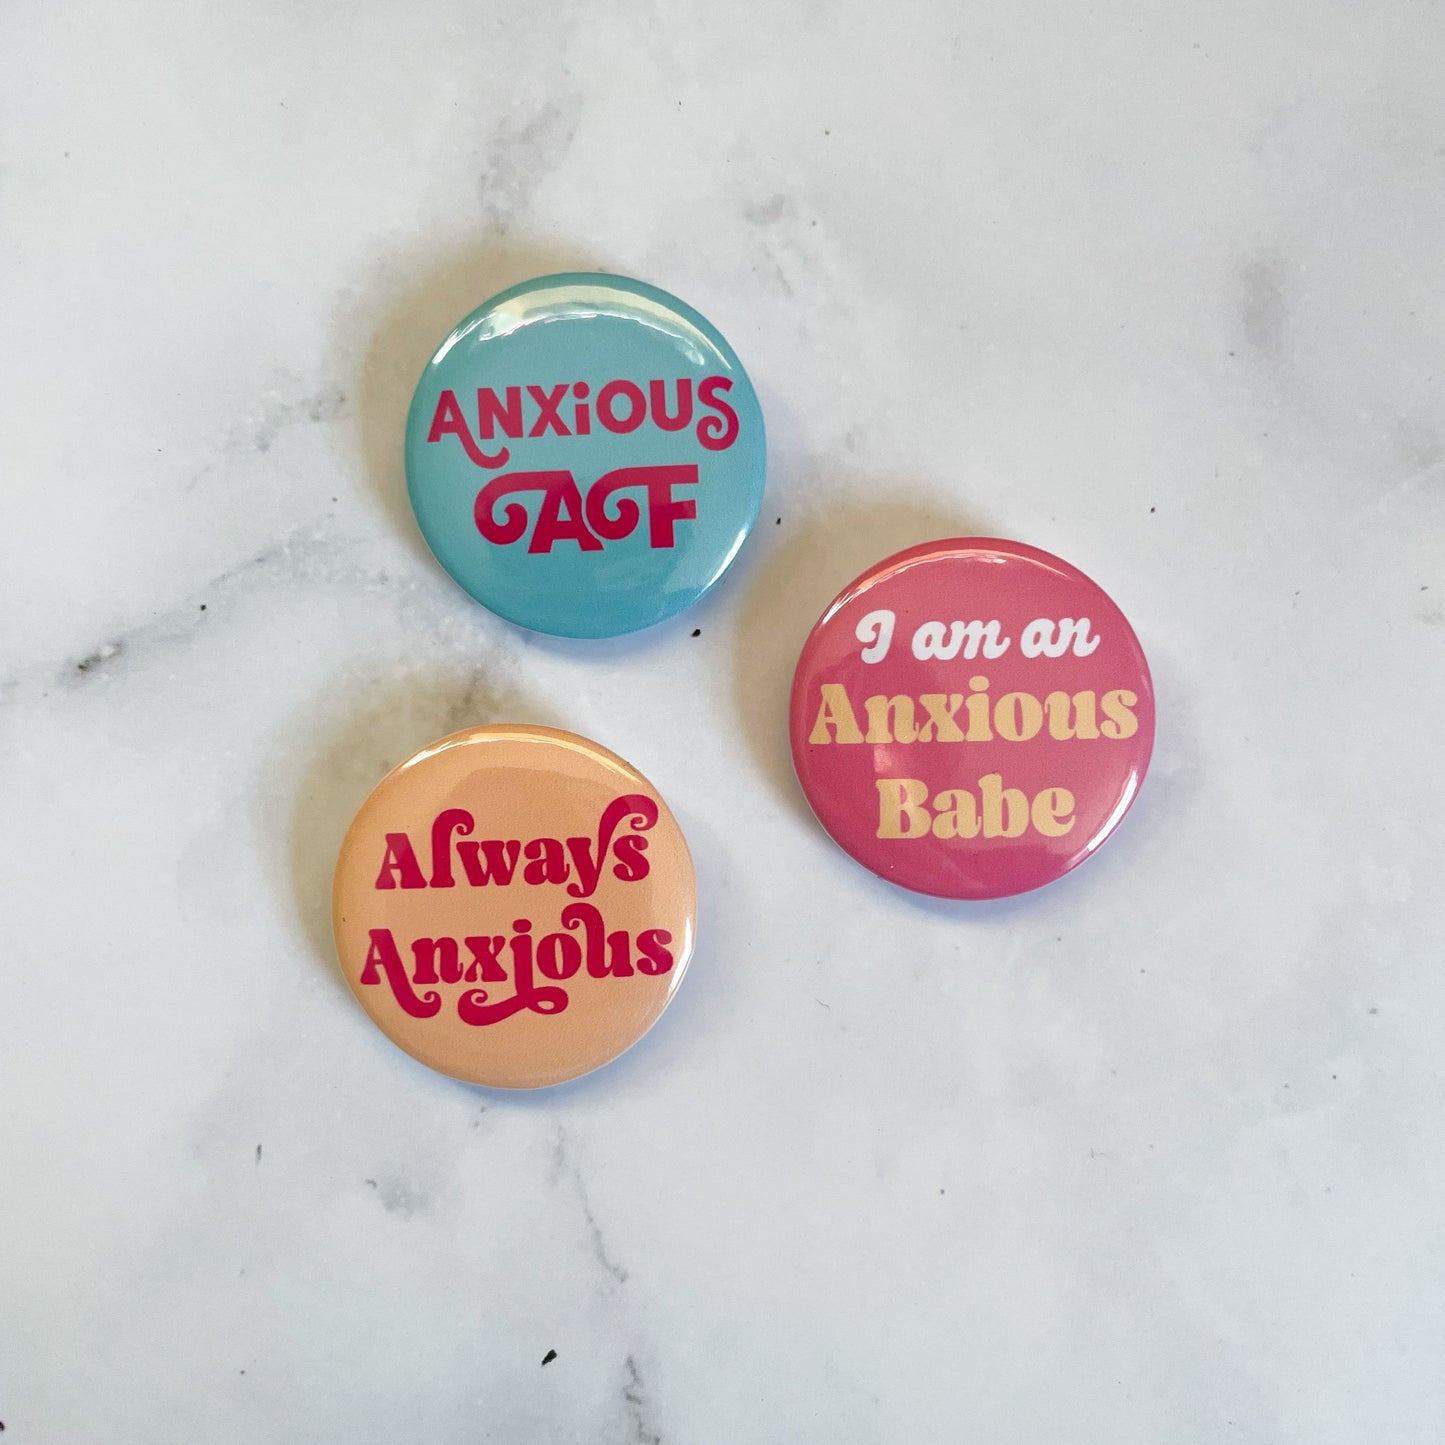 I'm and Anxious Babe Button / Badge (Buy 4 Get 1 FREE)